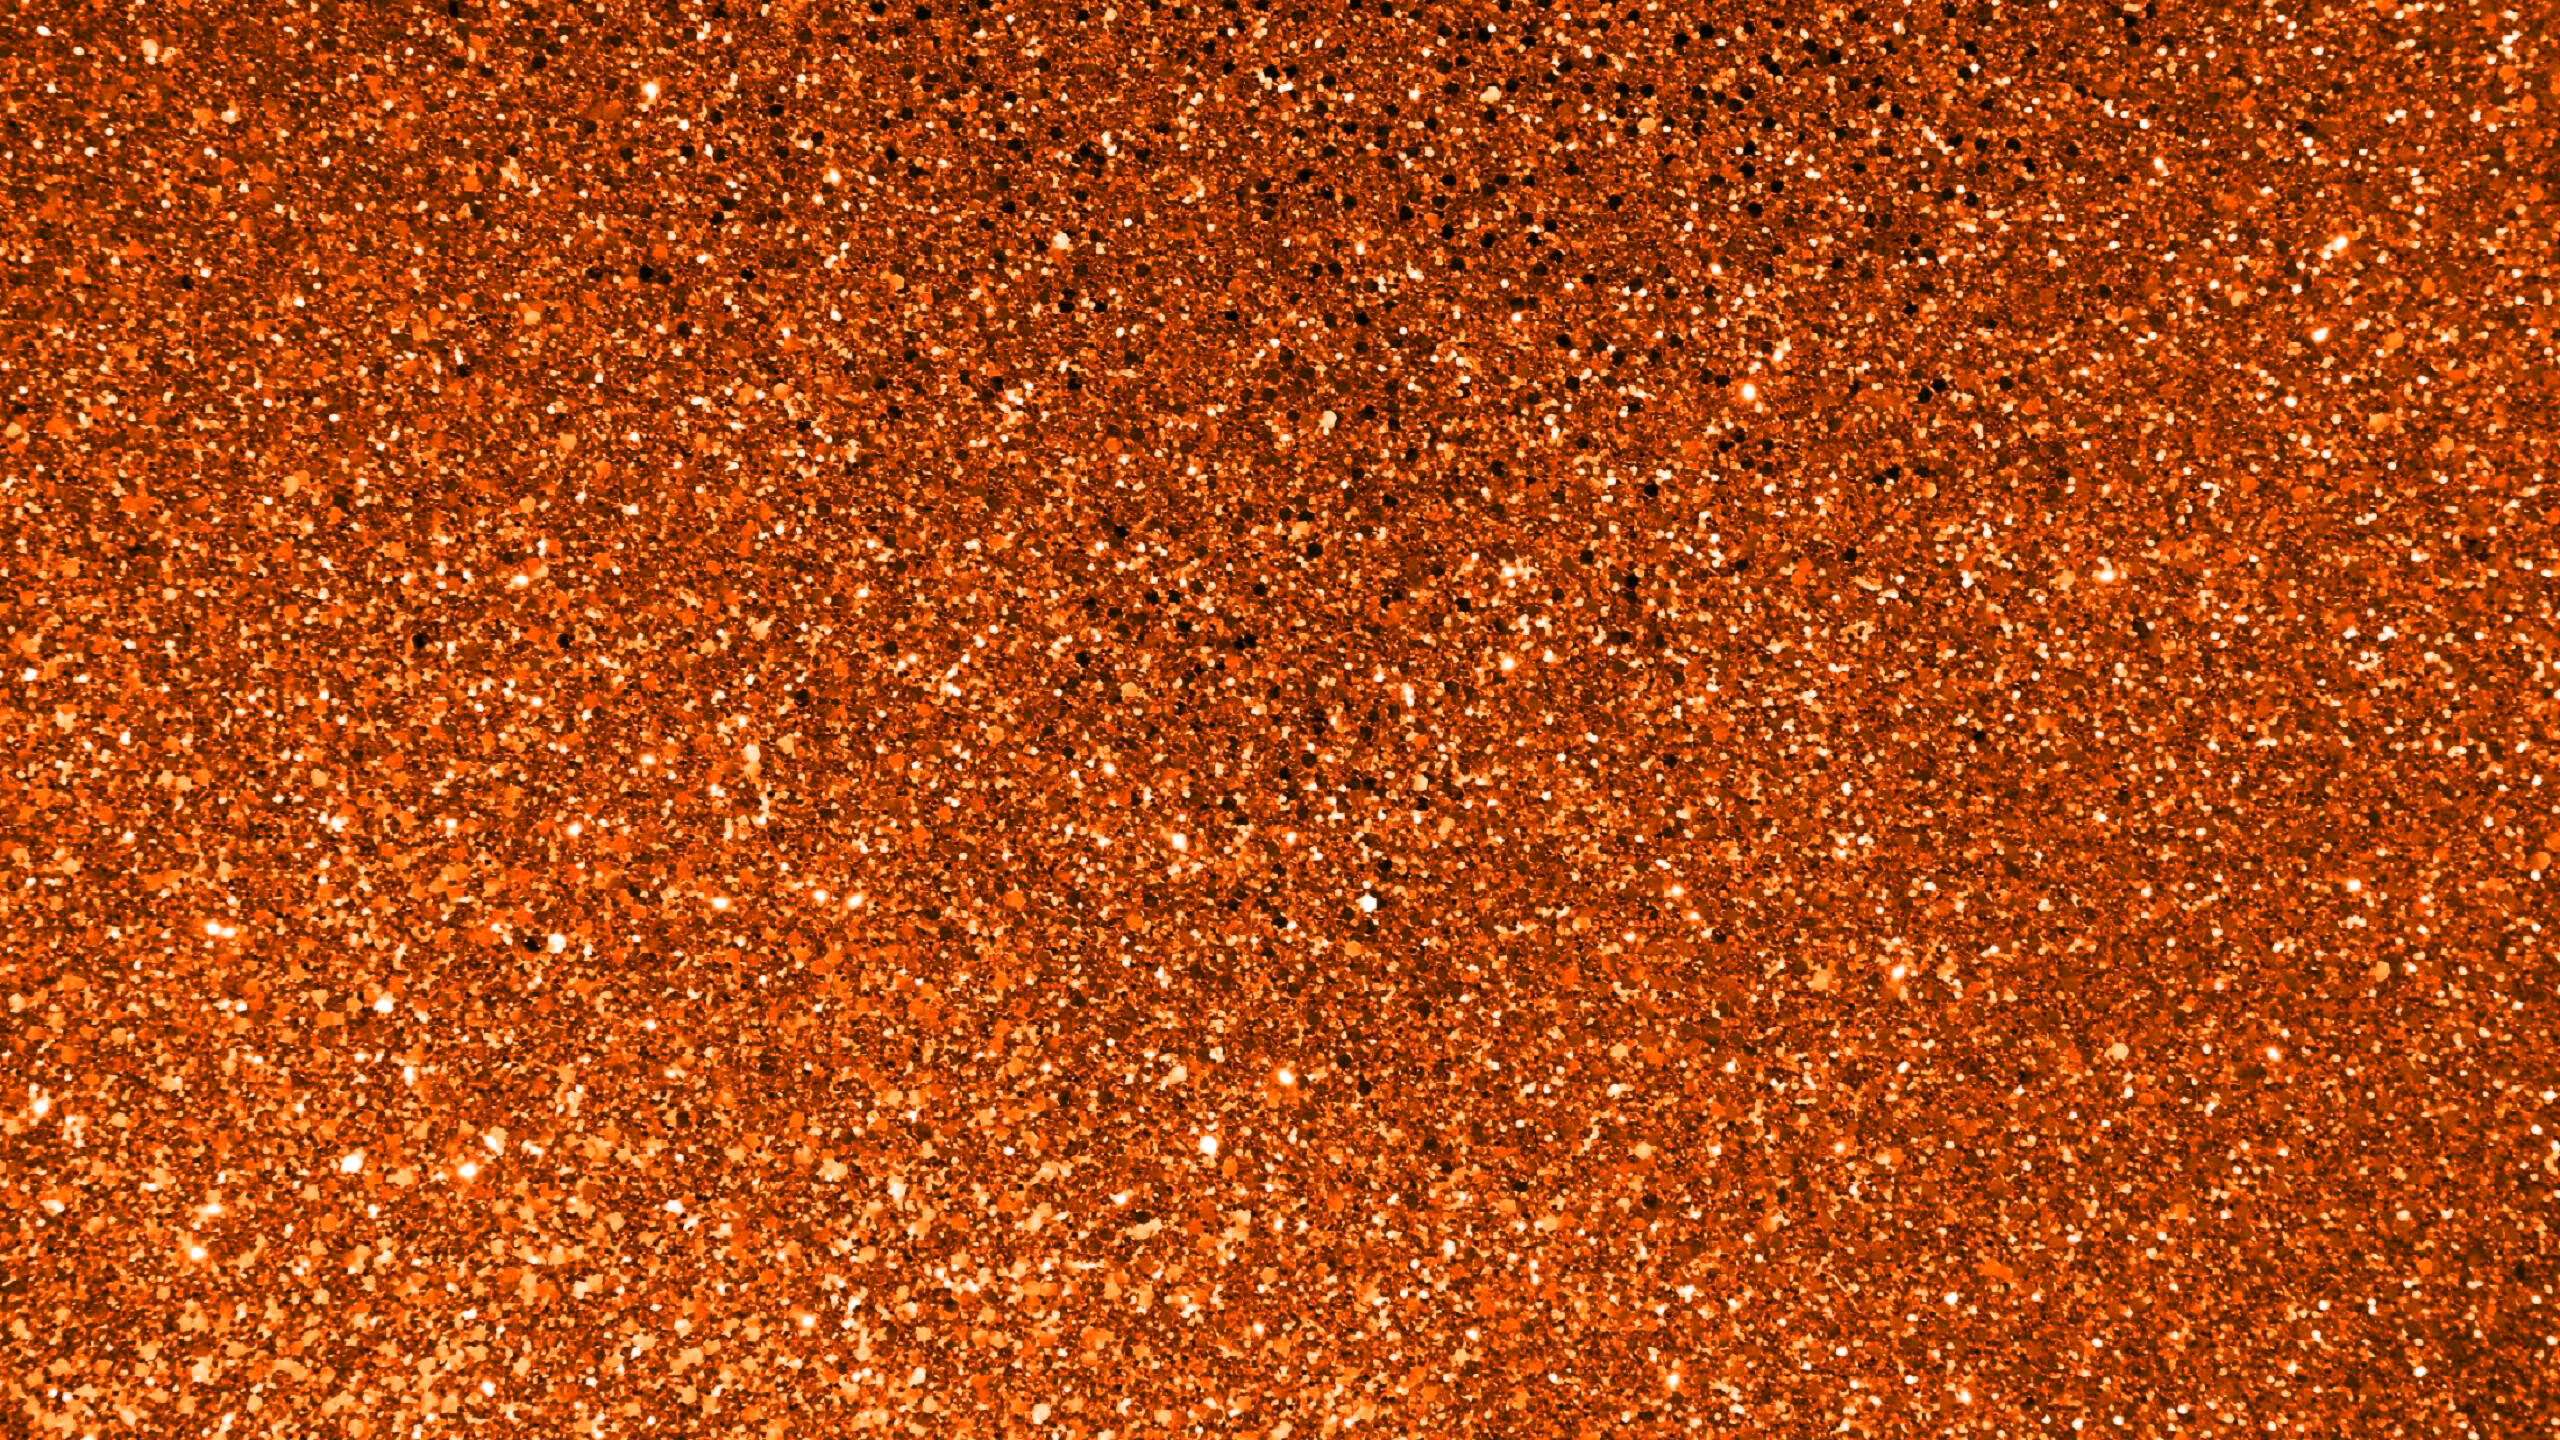 Sparkle: Glitter, Can be applied directly to skin, nails, or clothing for a shiny effect. 2560x1440 HD Wallpaper.